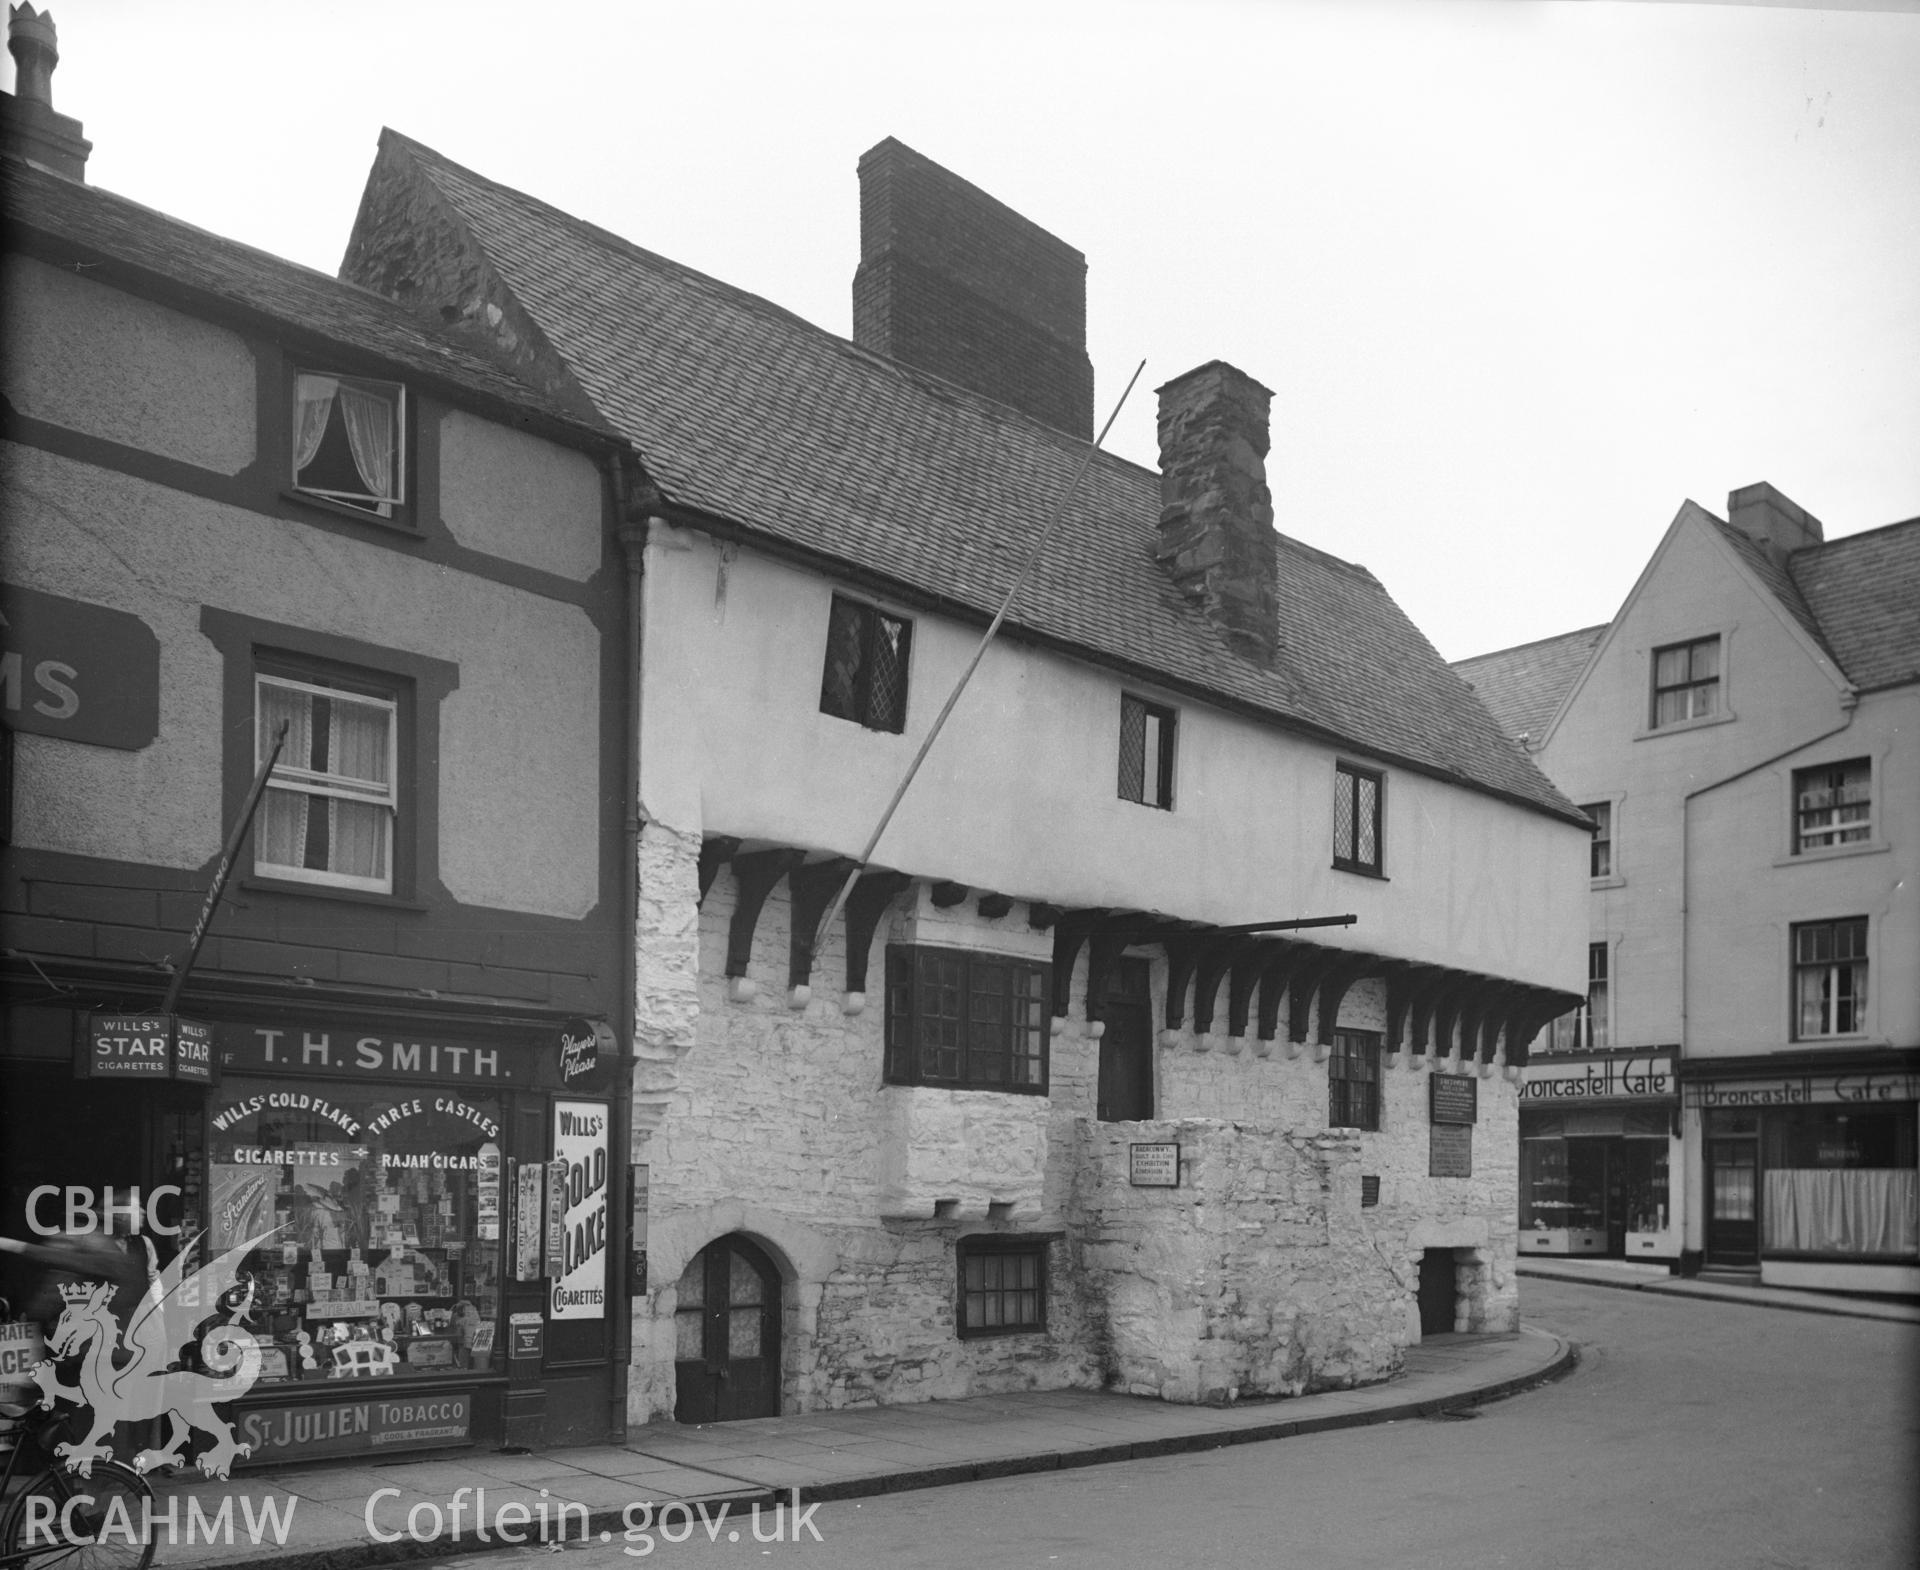 View of Aberconwy House, Conway, taken 07.12.1950.